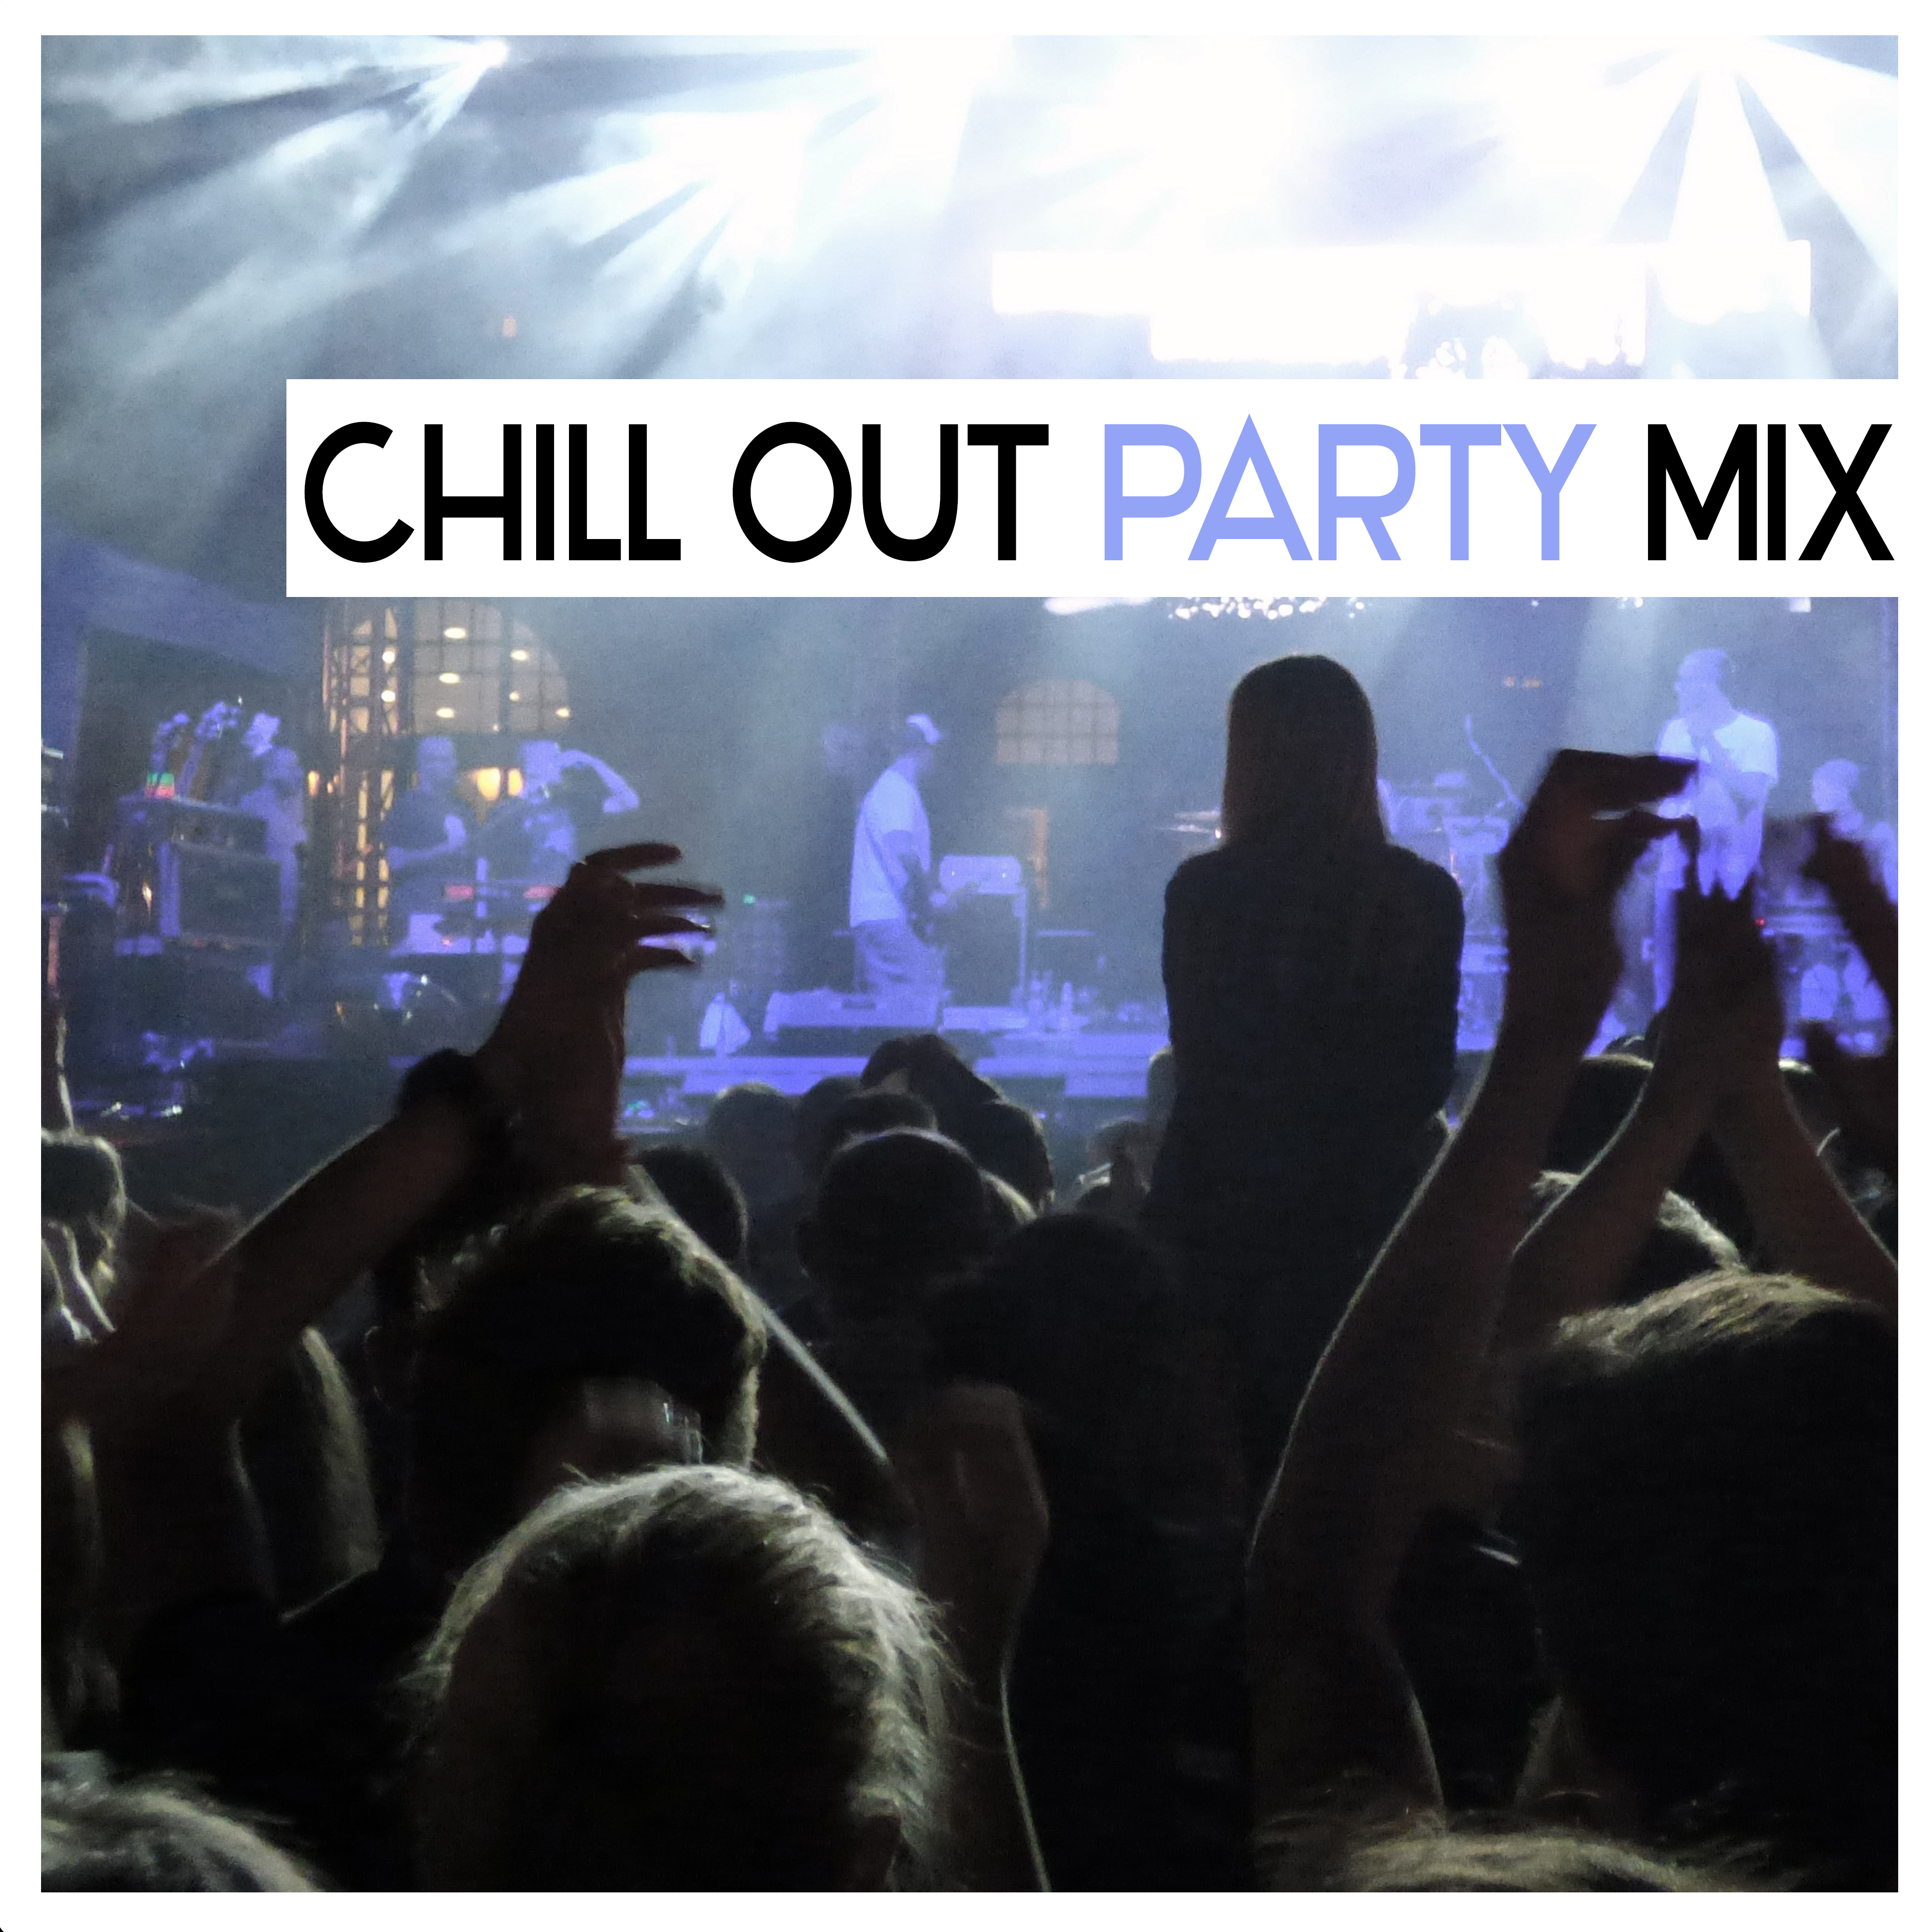 Chill Out Party Mix – Party Music, Sensual Music, Sexy Dance, Chill Out Sounds